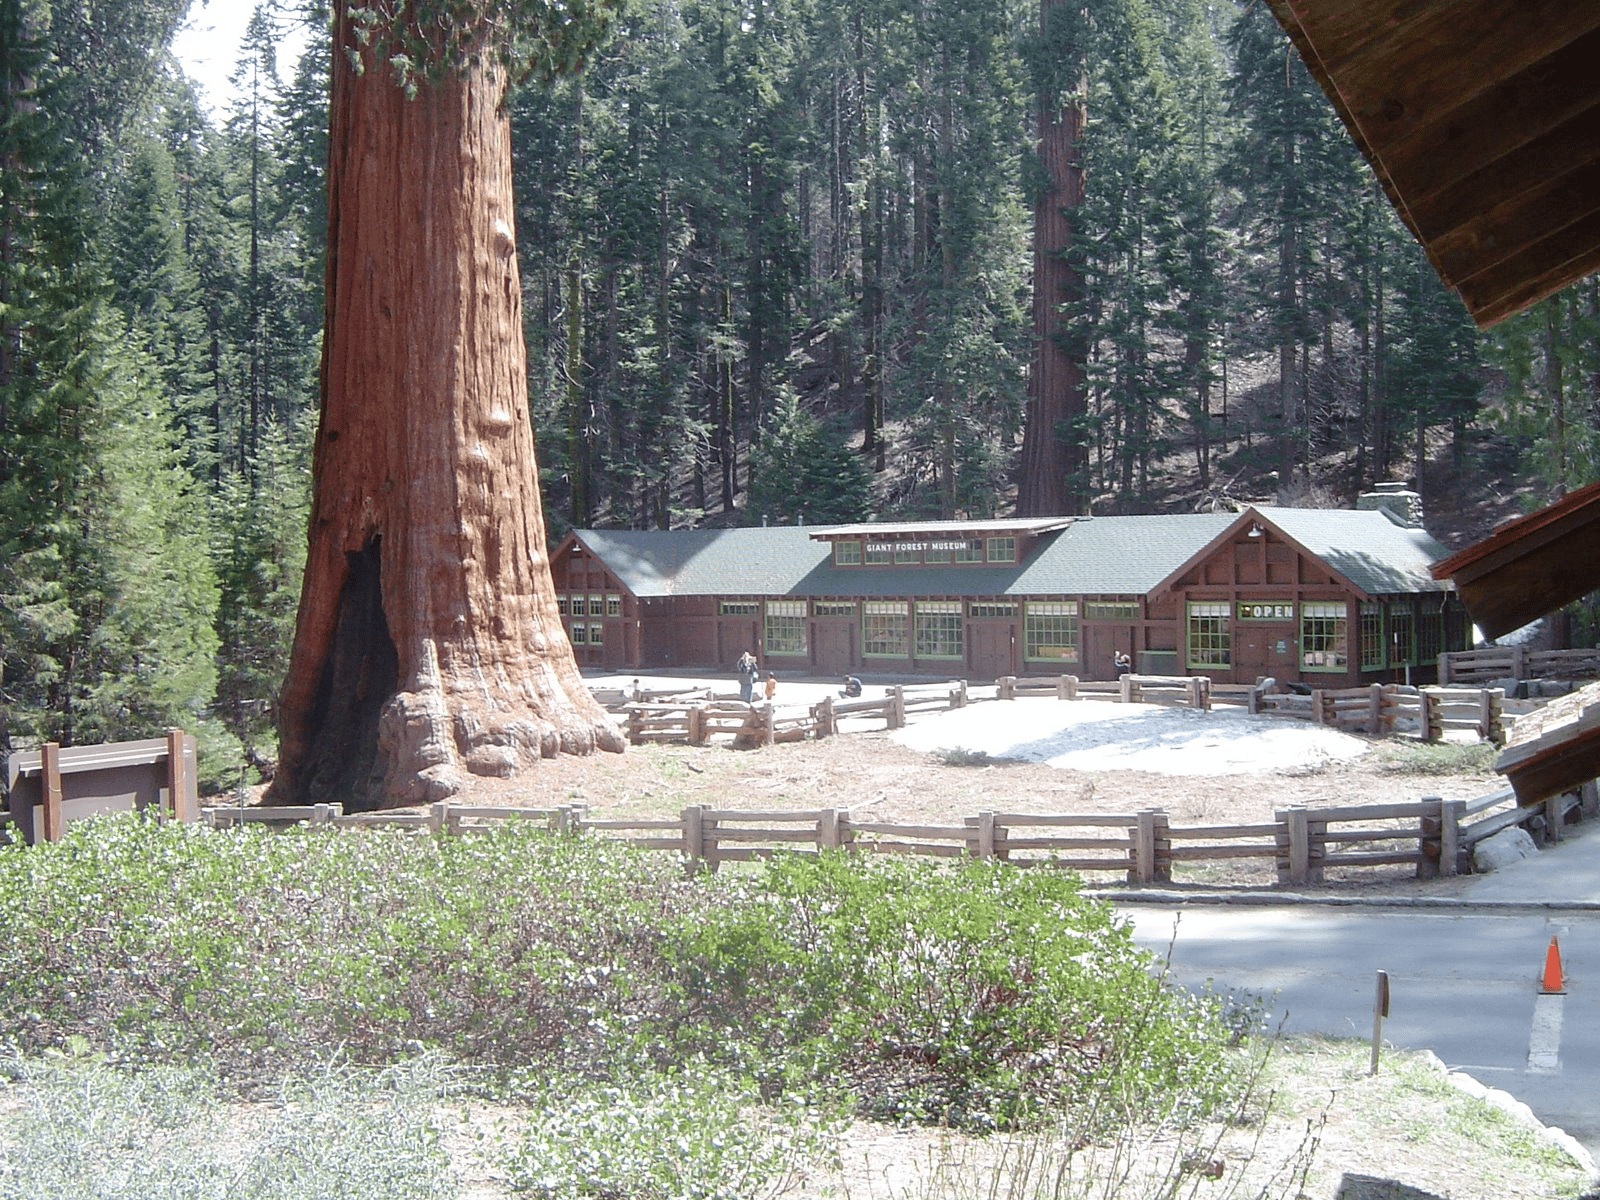 Sequoia National Park Facts